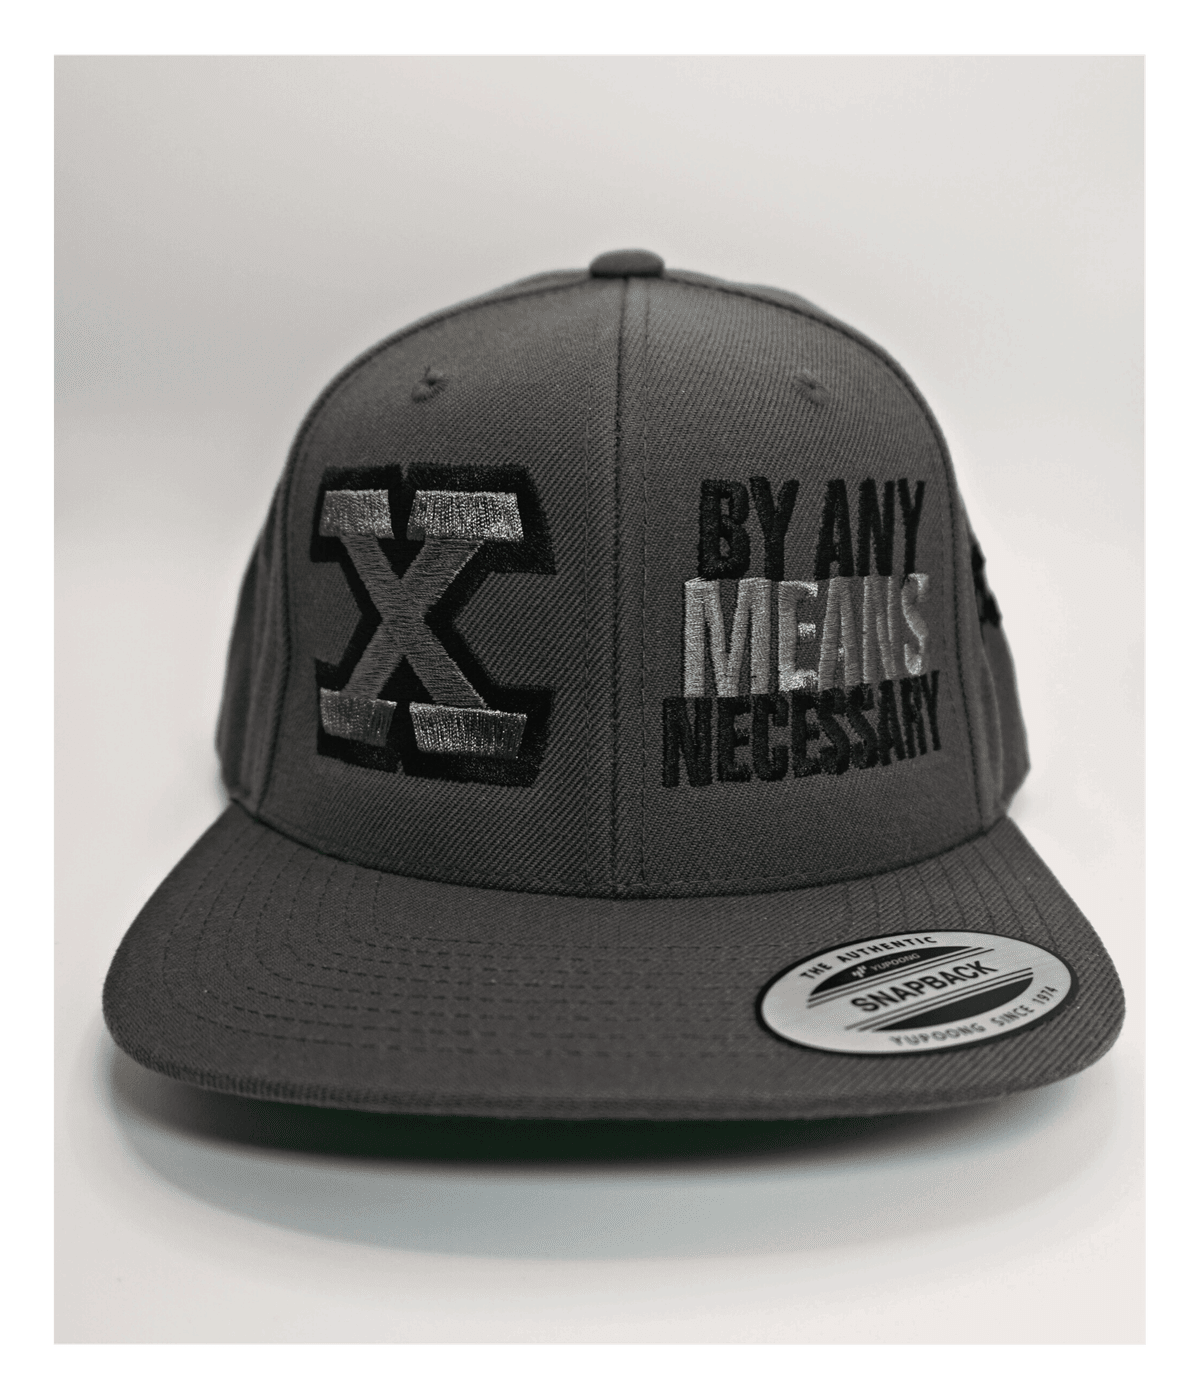 Malcolm X, By Any Means Necessary - Embroidered, Flat-Bill, Classic, Snap-Back Cap. ONE SIZE